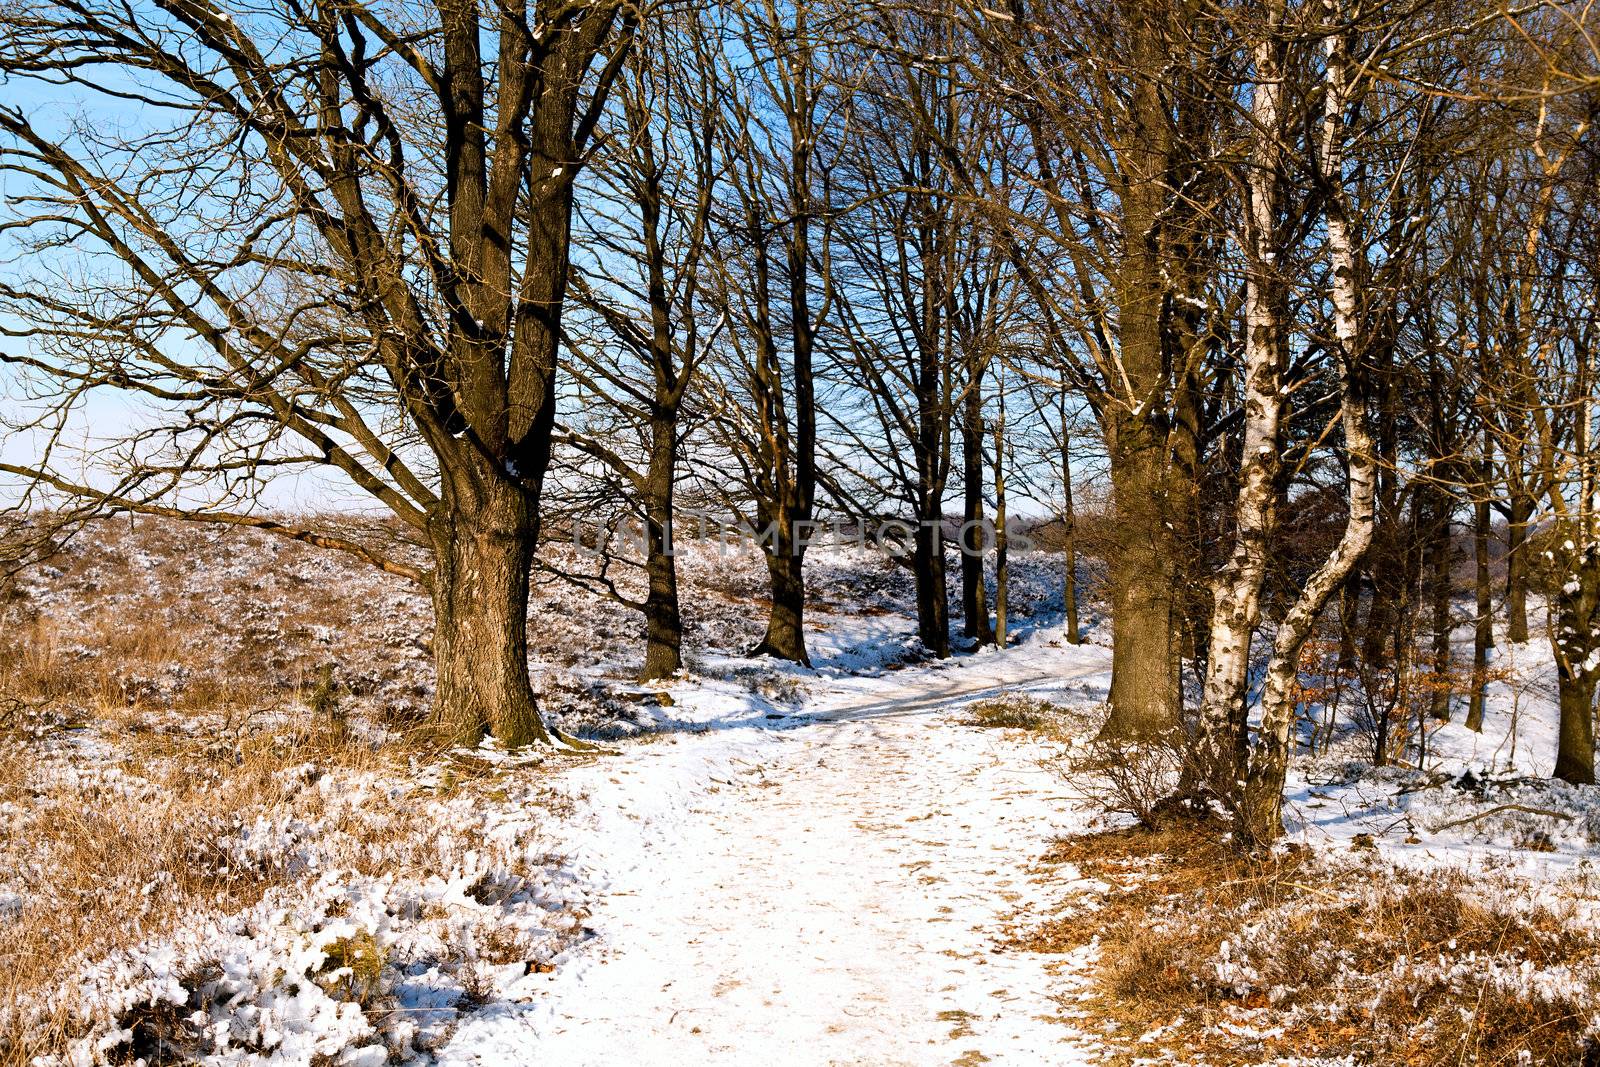 snowy path between the trees in the winter forest